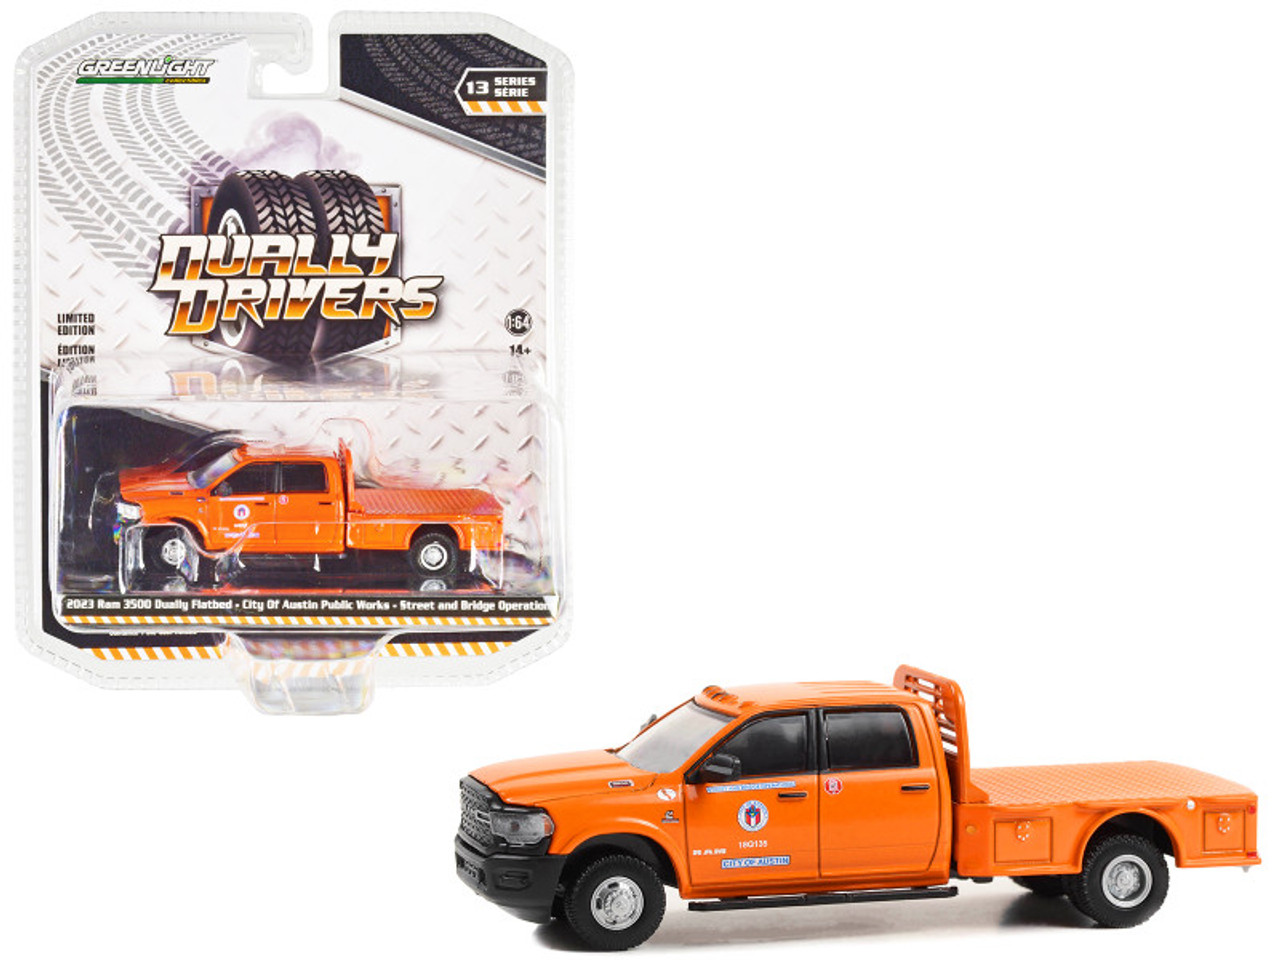 2023 Dodge Ram 3500 Dually Flatbed Truck Orange "City Of Austin Public Works - Street and Bridge Operations Austin Texas" "Dually Drivers" Series 13 1/64 Diecast Model Car by Greenlight